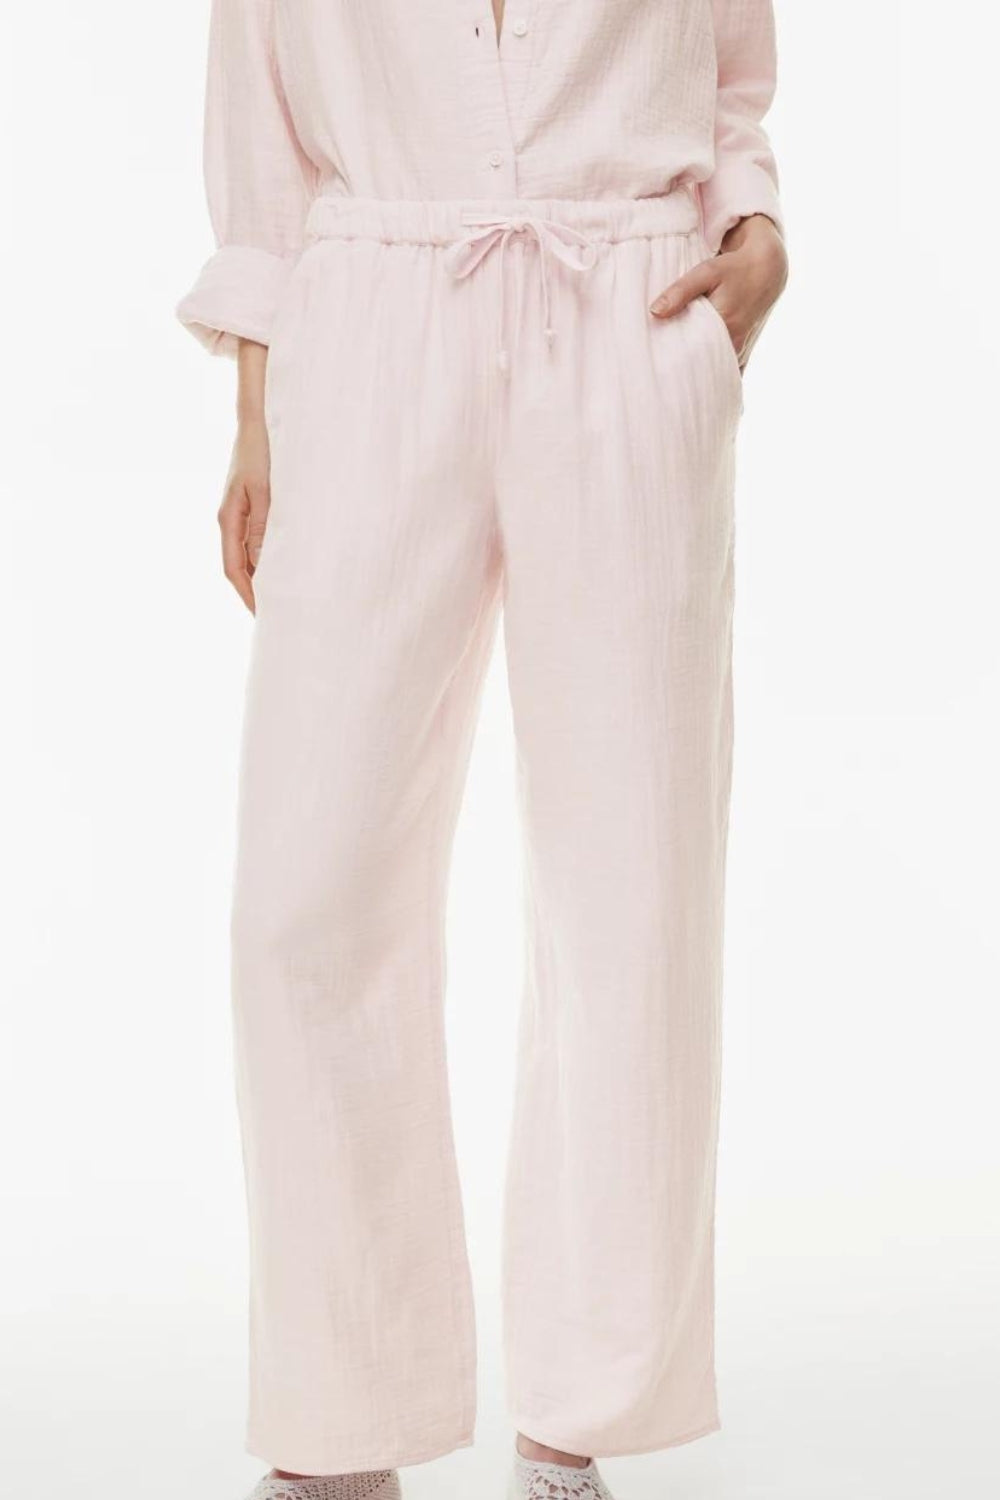 Plume baby pink trouser